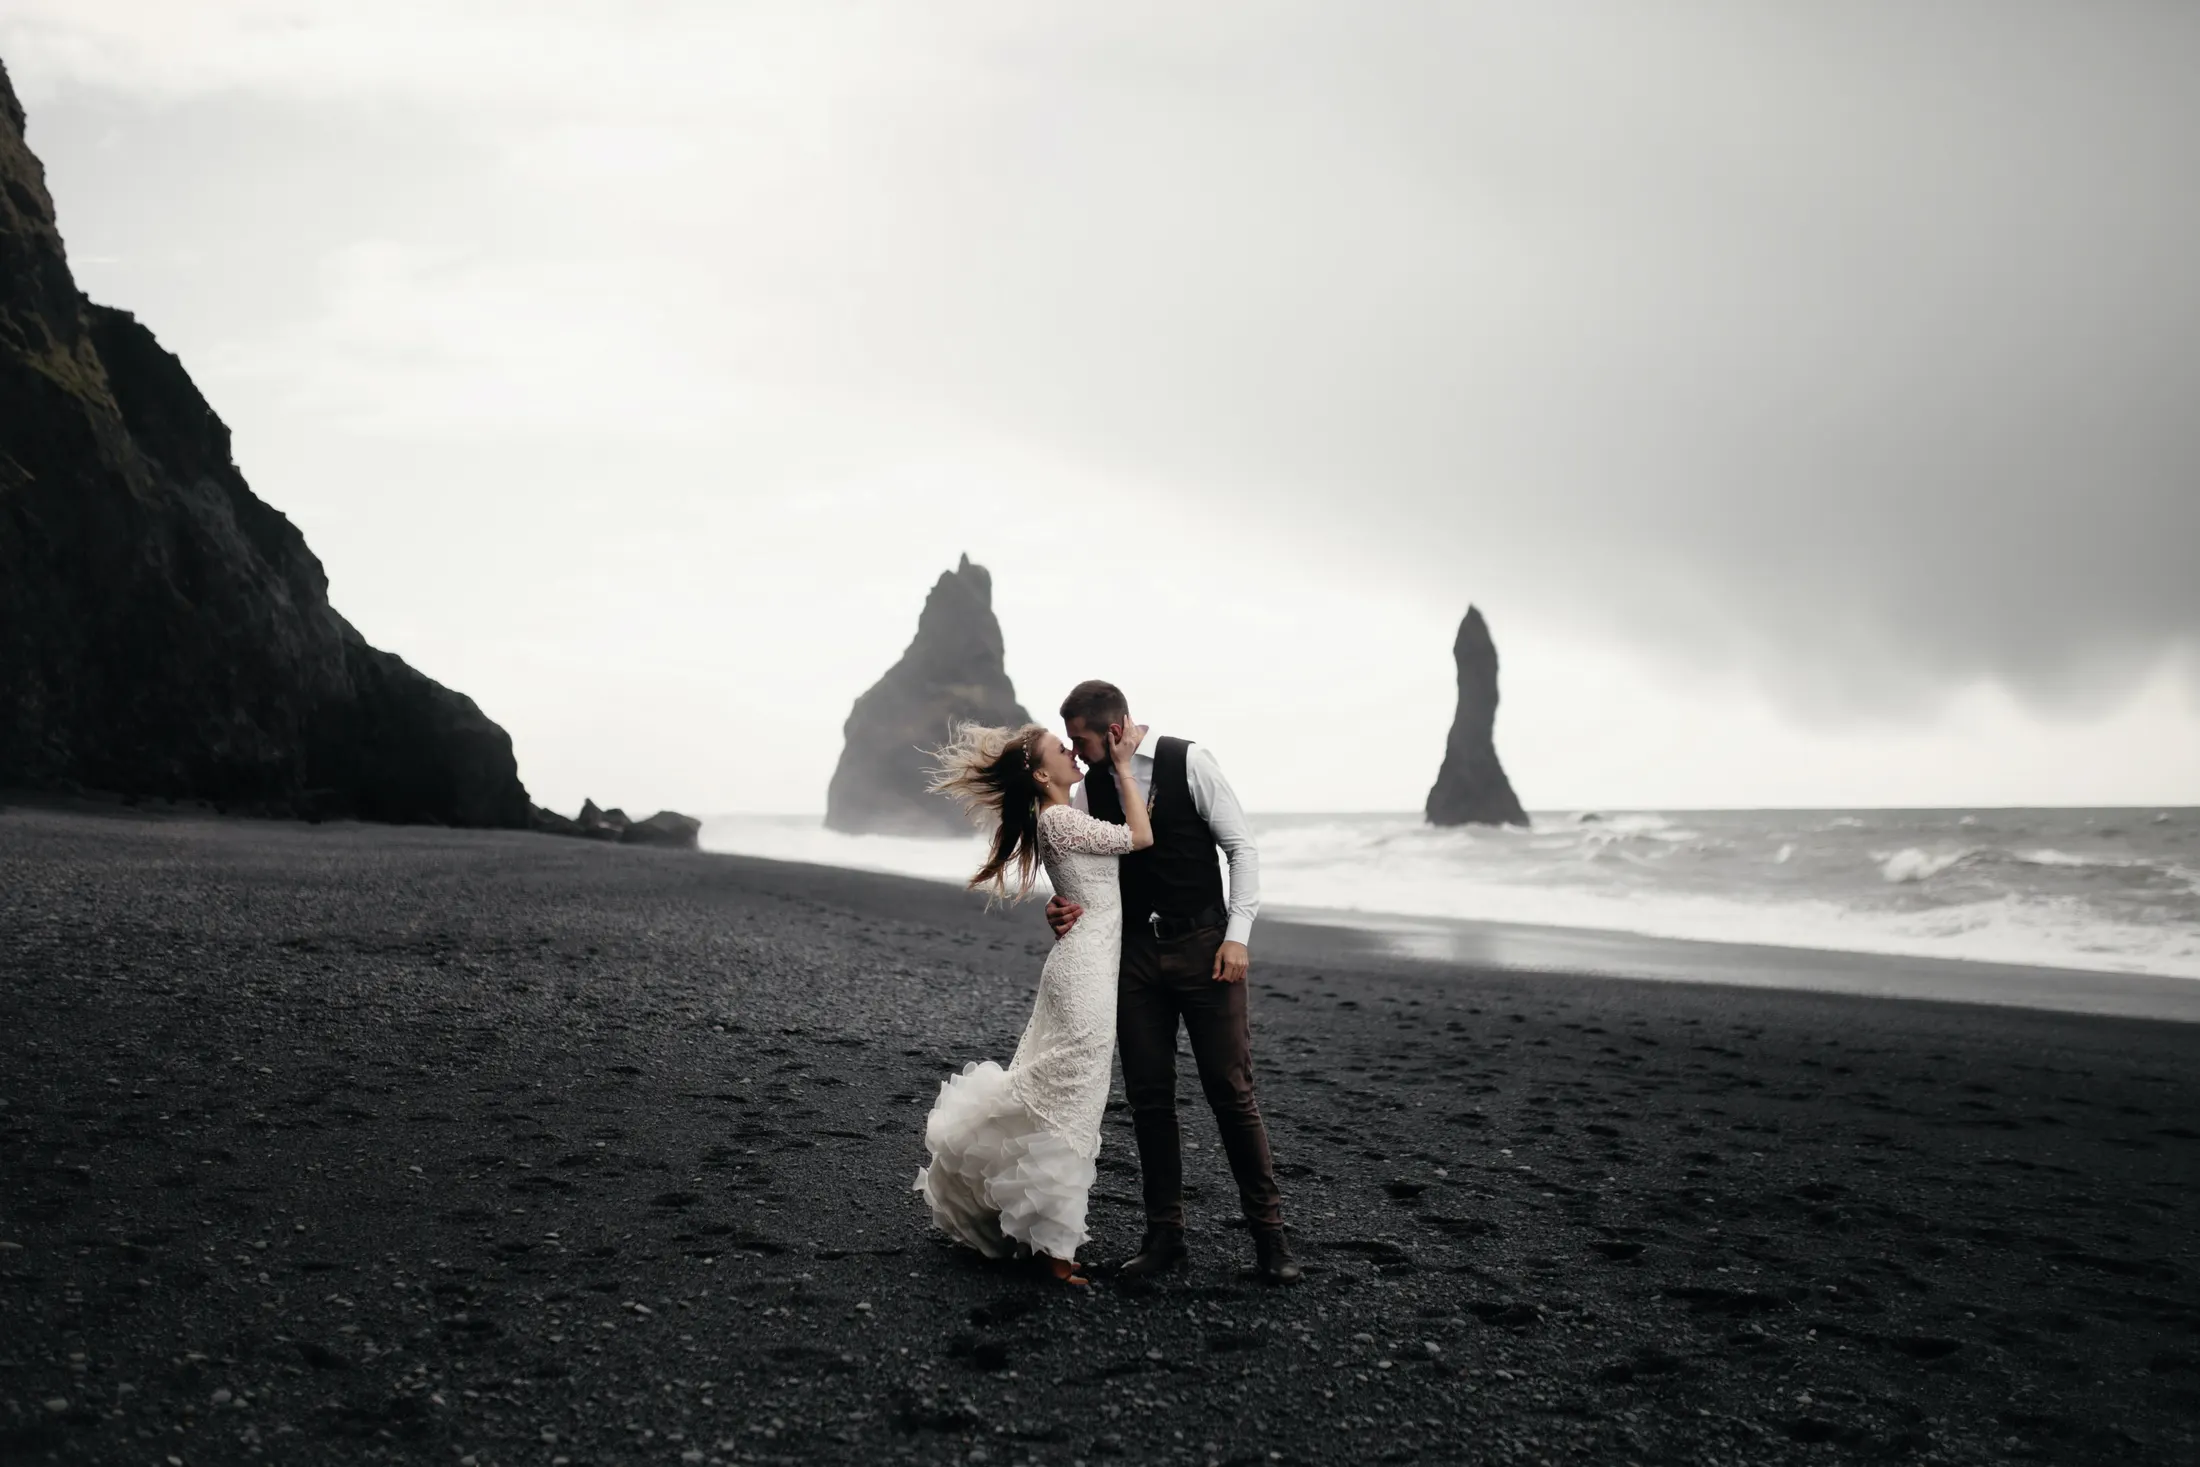 A couple getting married in Iceland